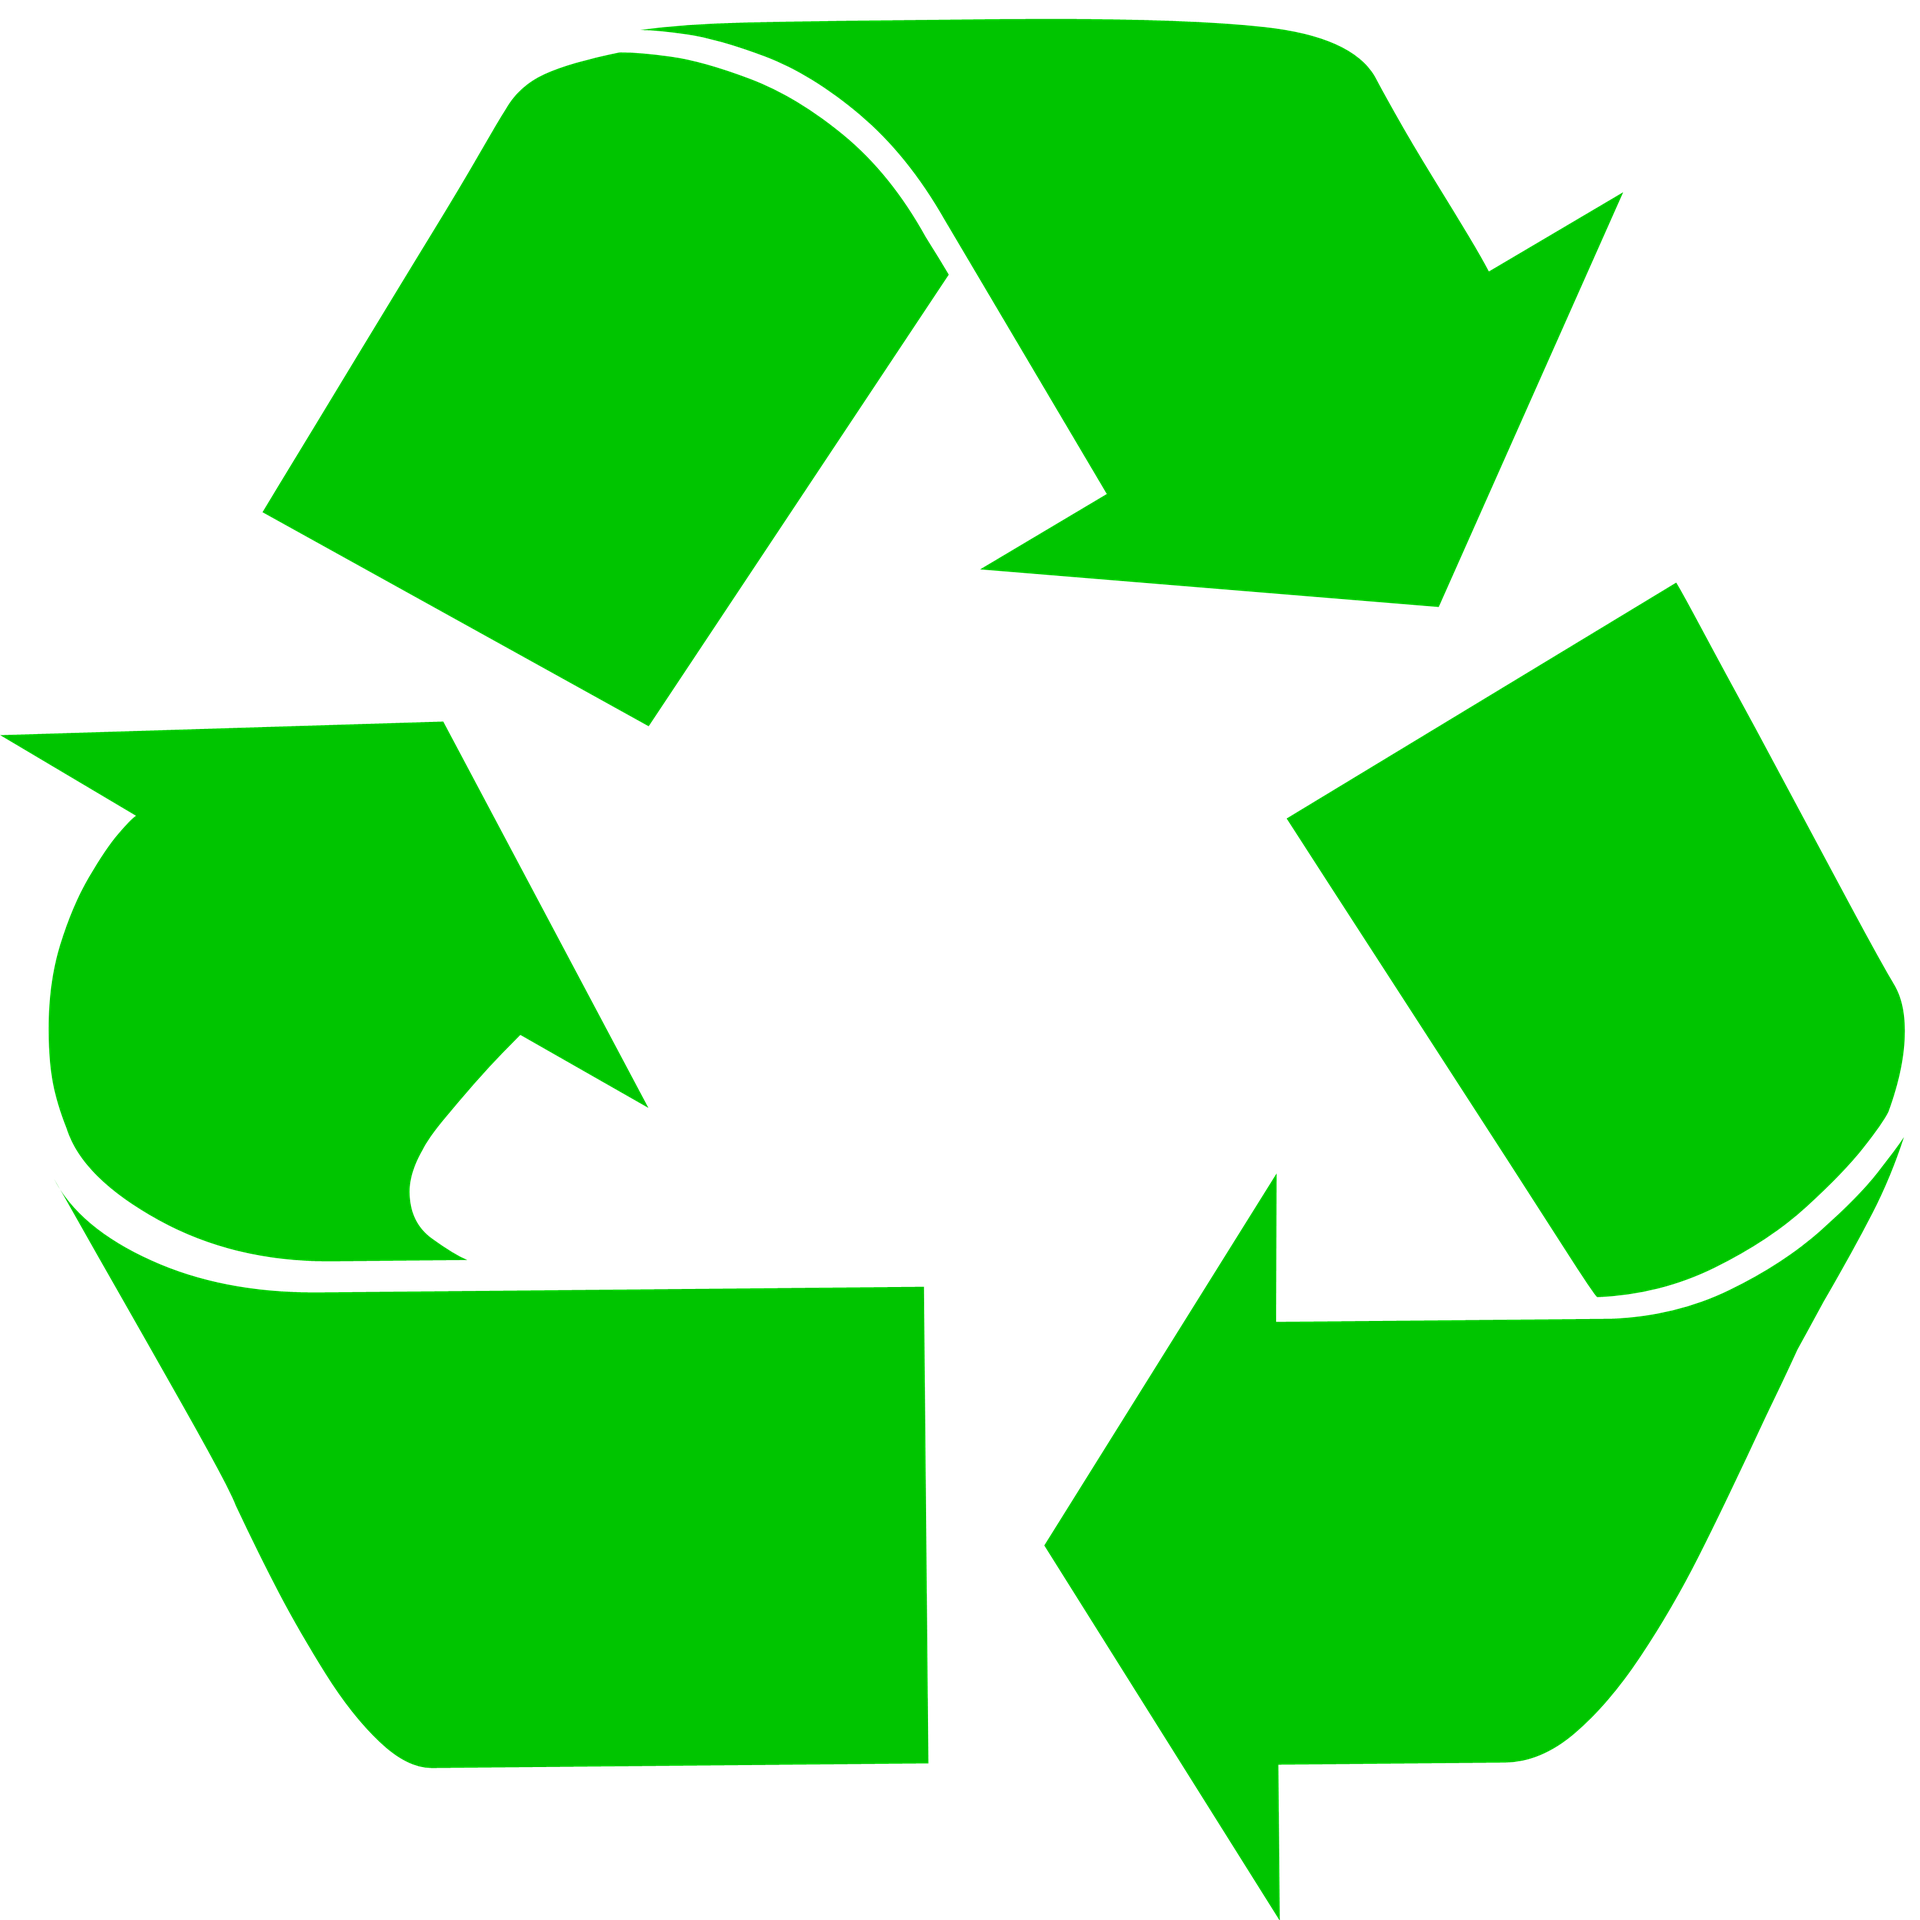 recycling-1341372_1920